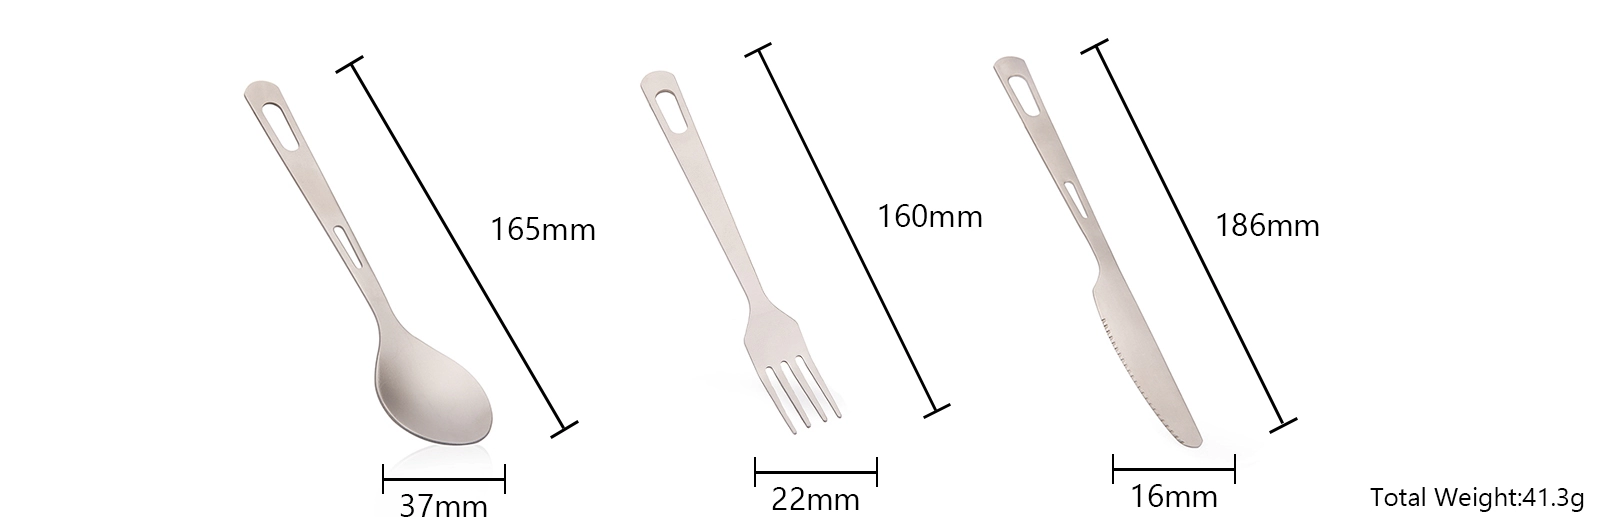 details of Titanium utensils Eco-Friendly Coffee Spoon, Spork and Spoon Set for Camping